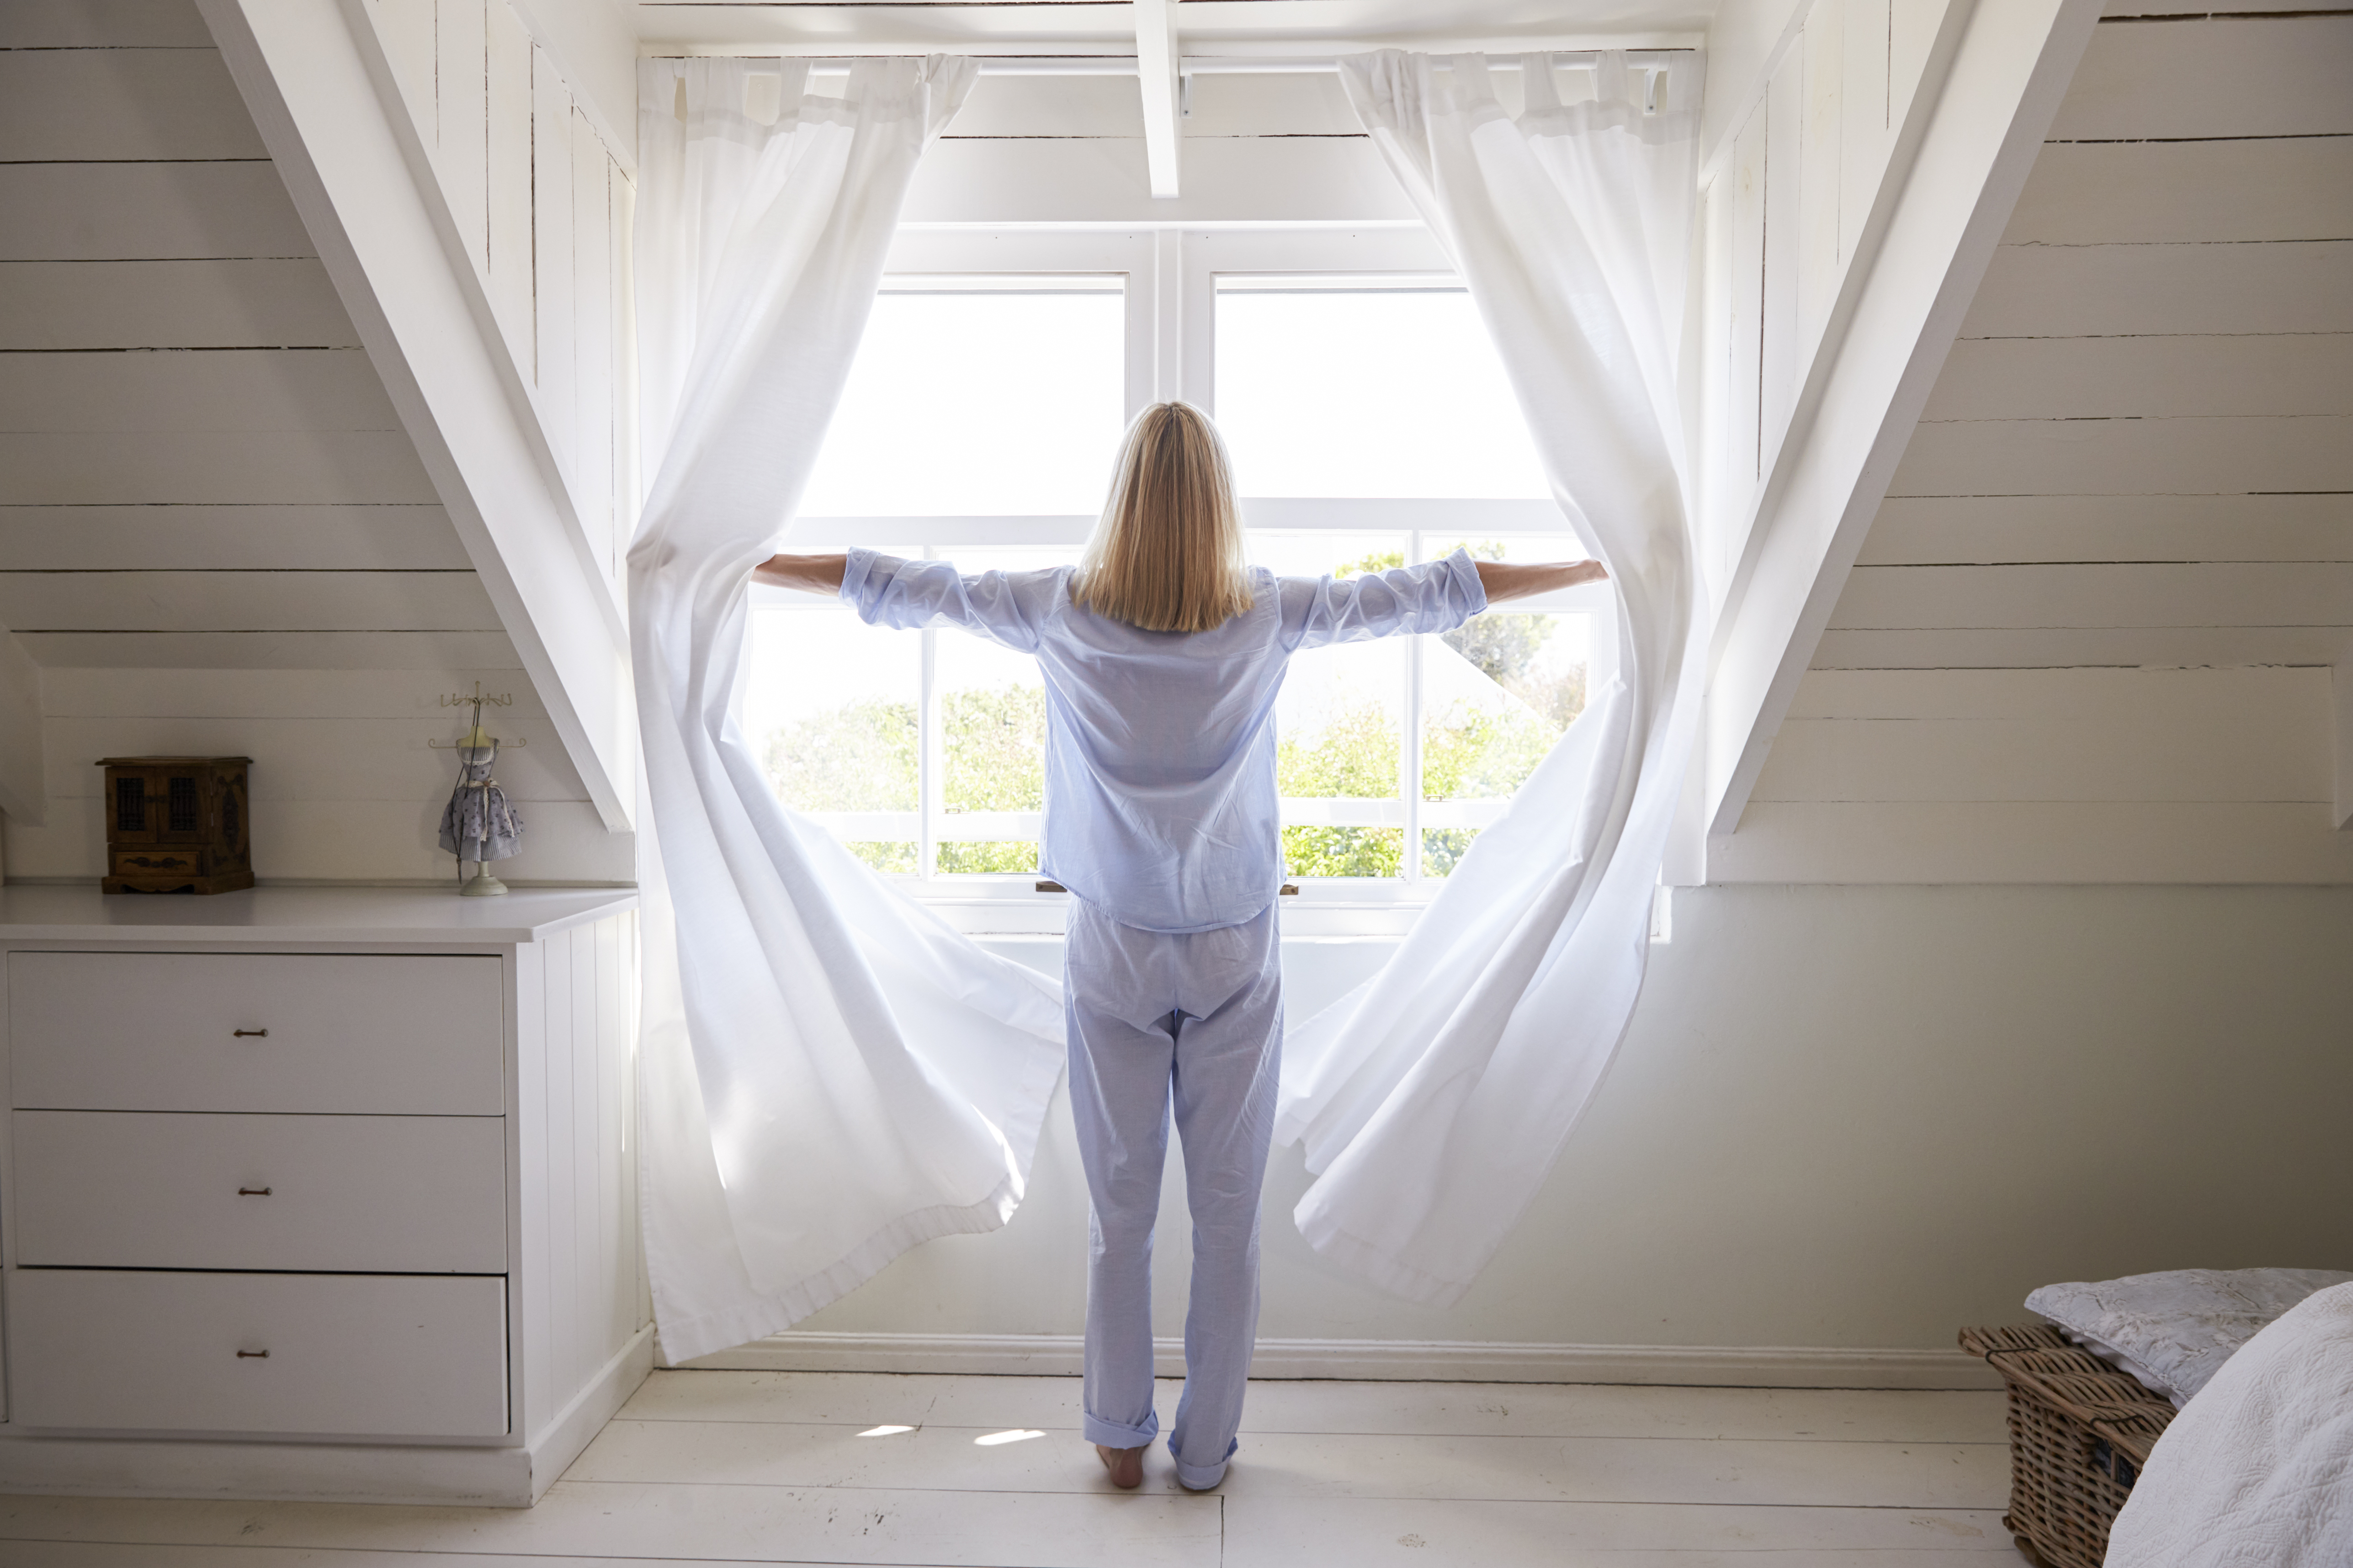 Rear View Of Woman Opening Curtains And Looking Out Of Window